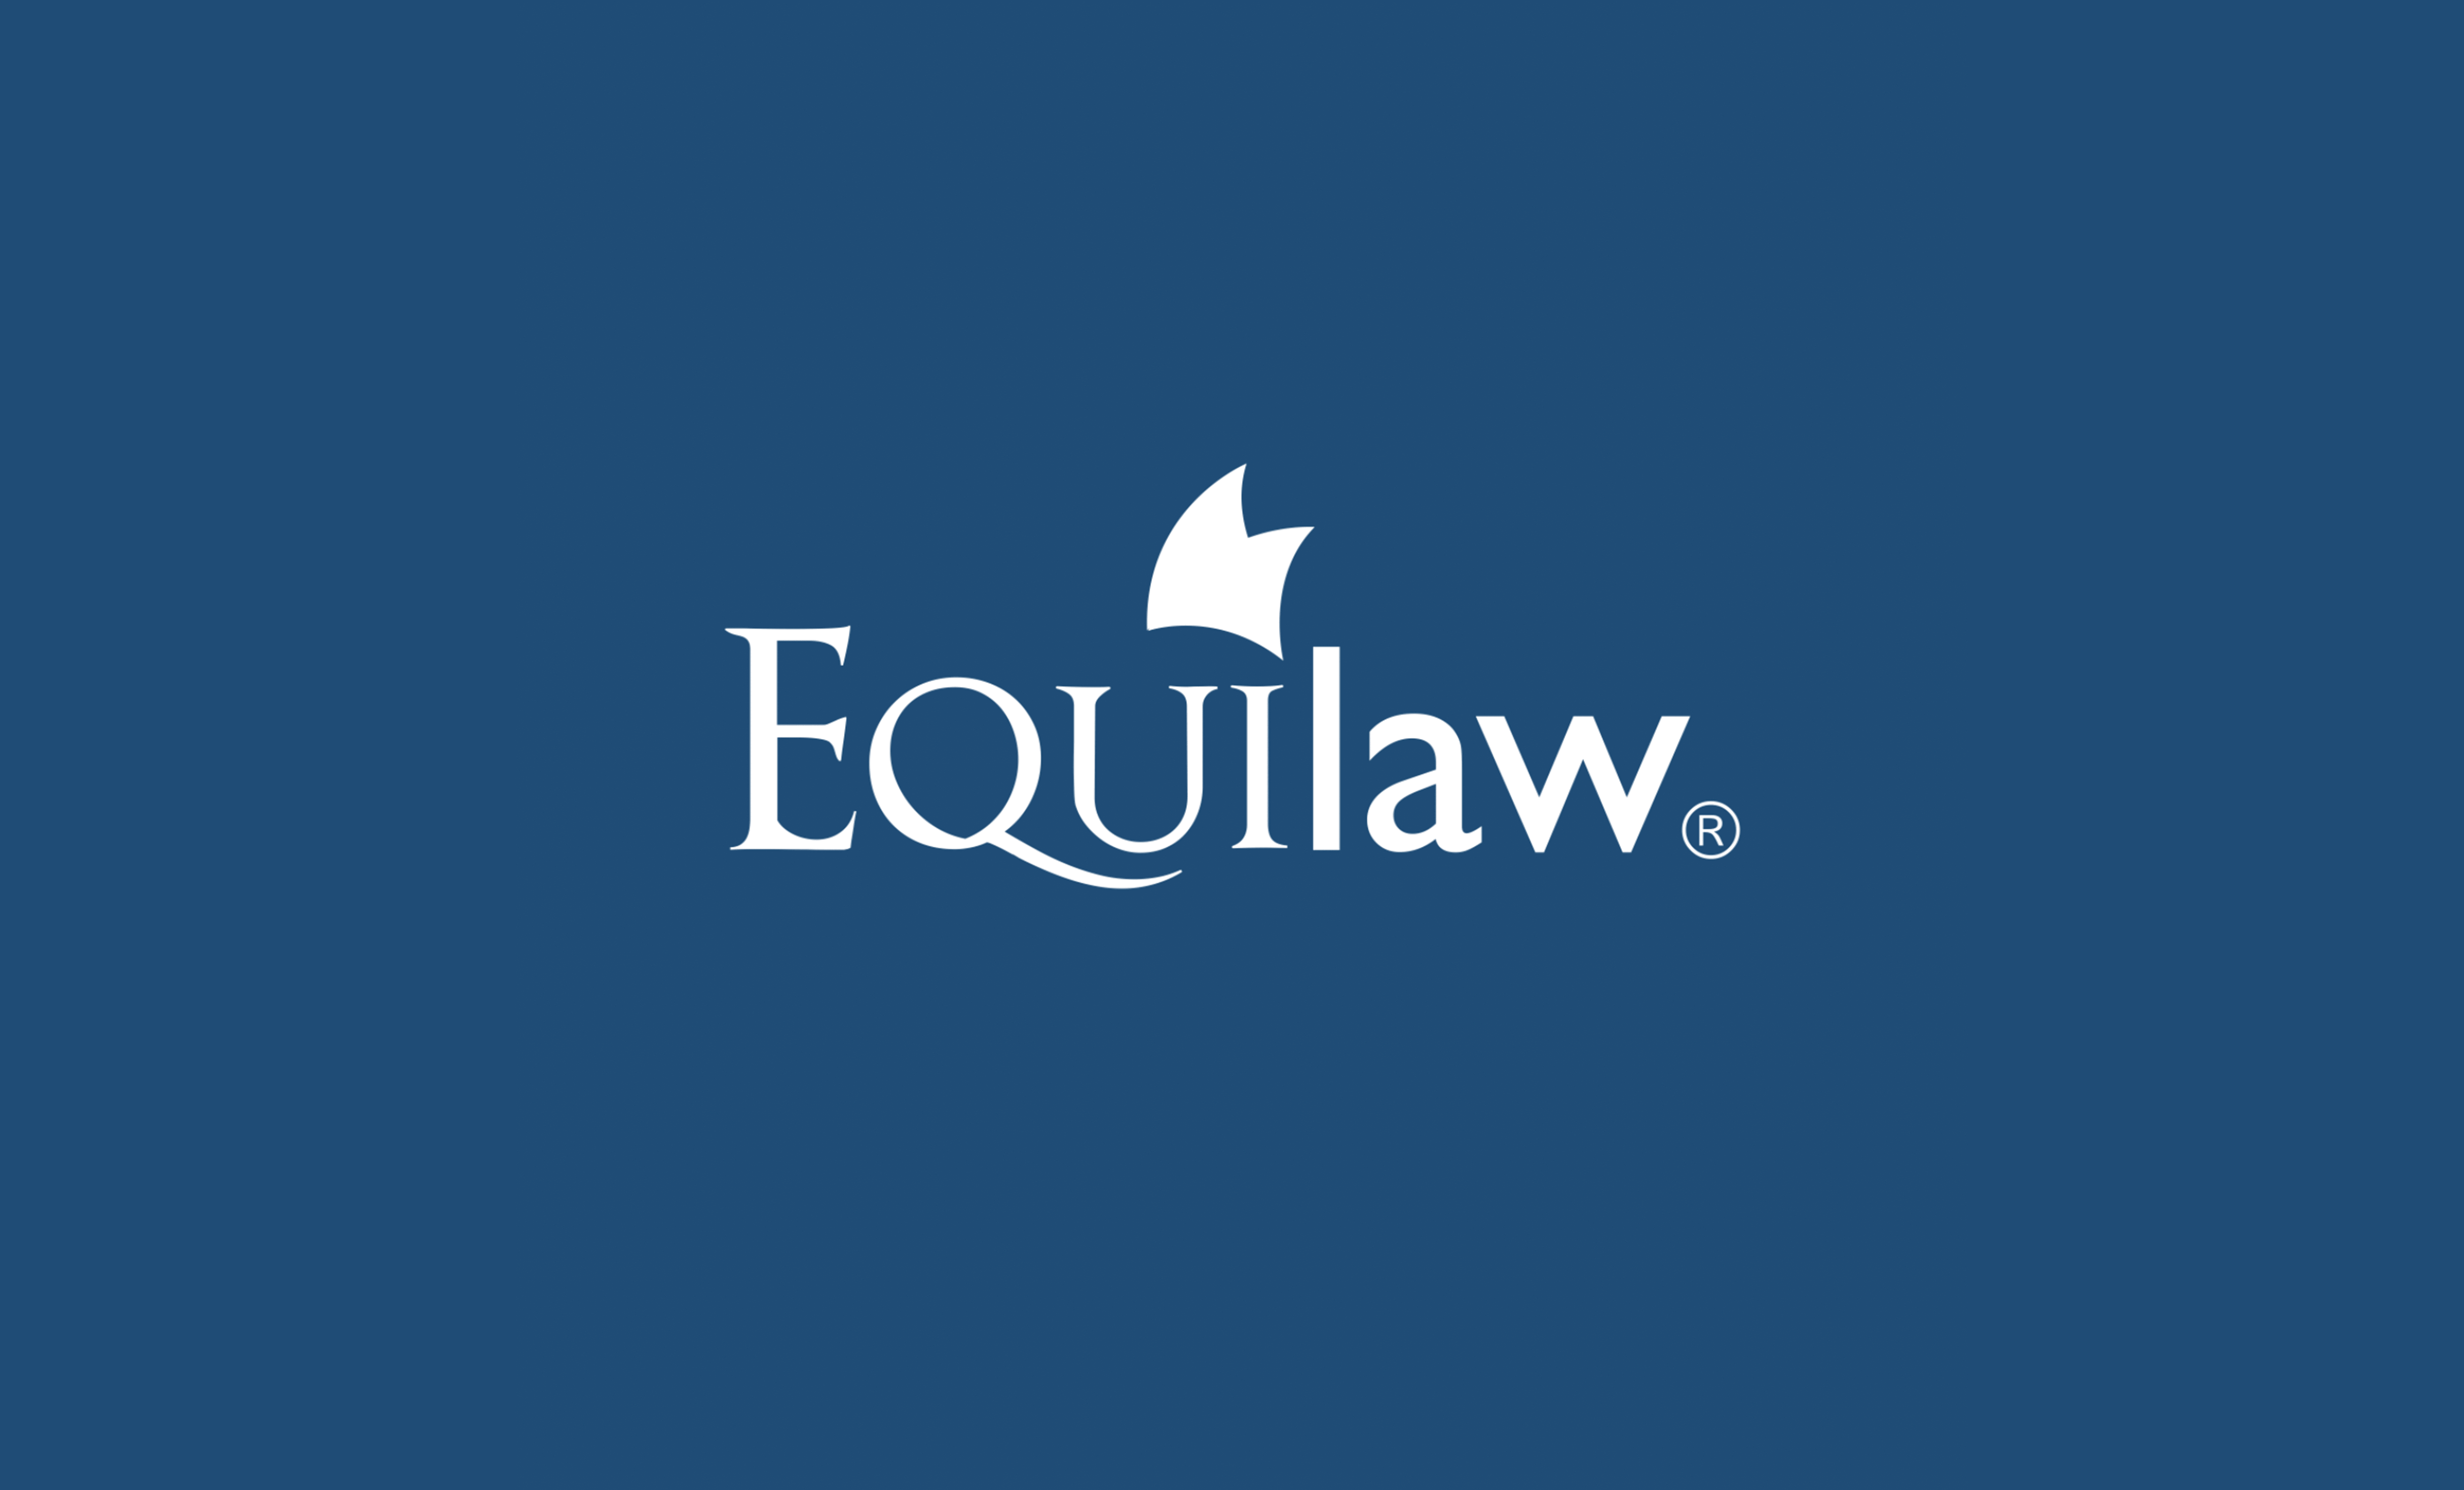 Equity release law firm is released from the burden of paper post